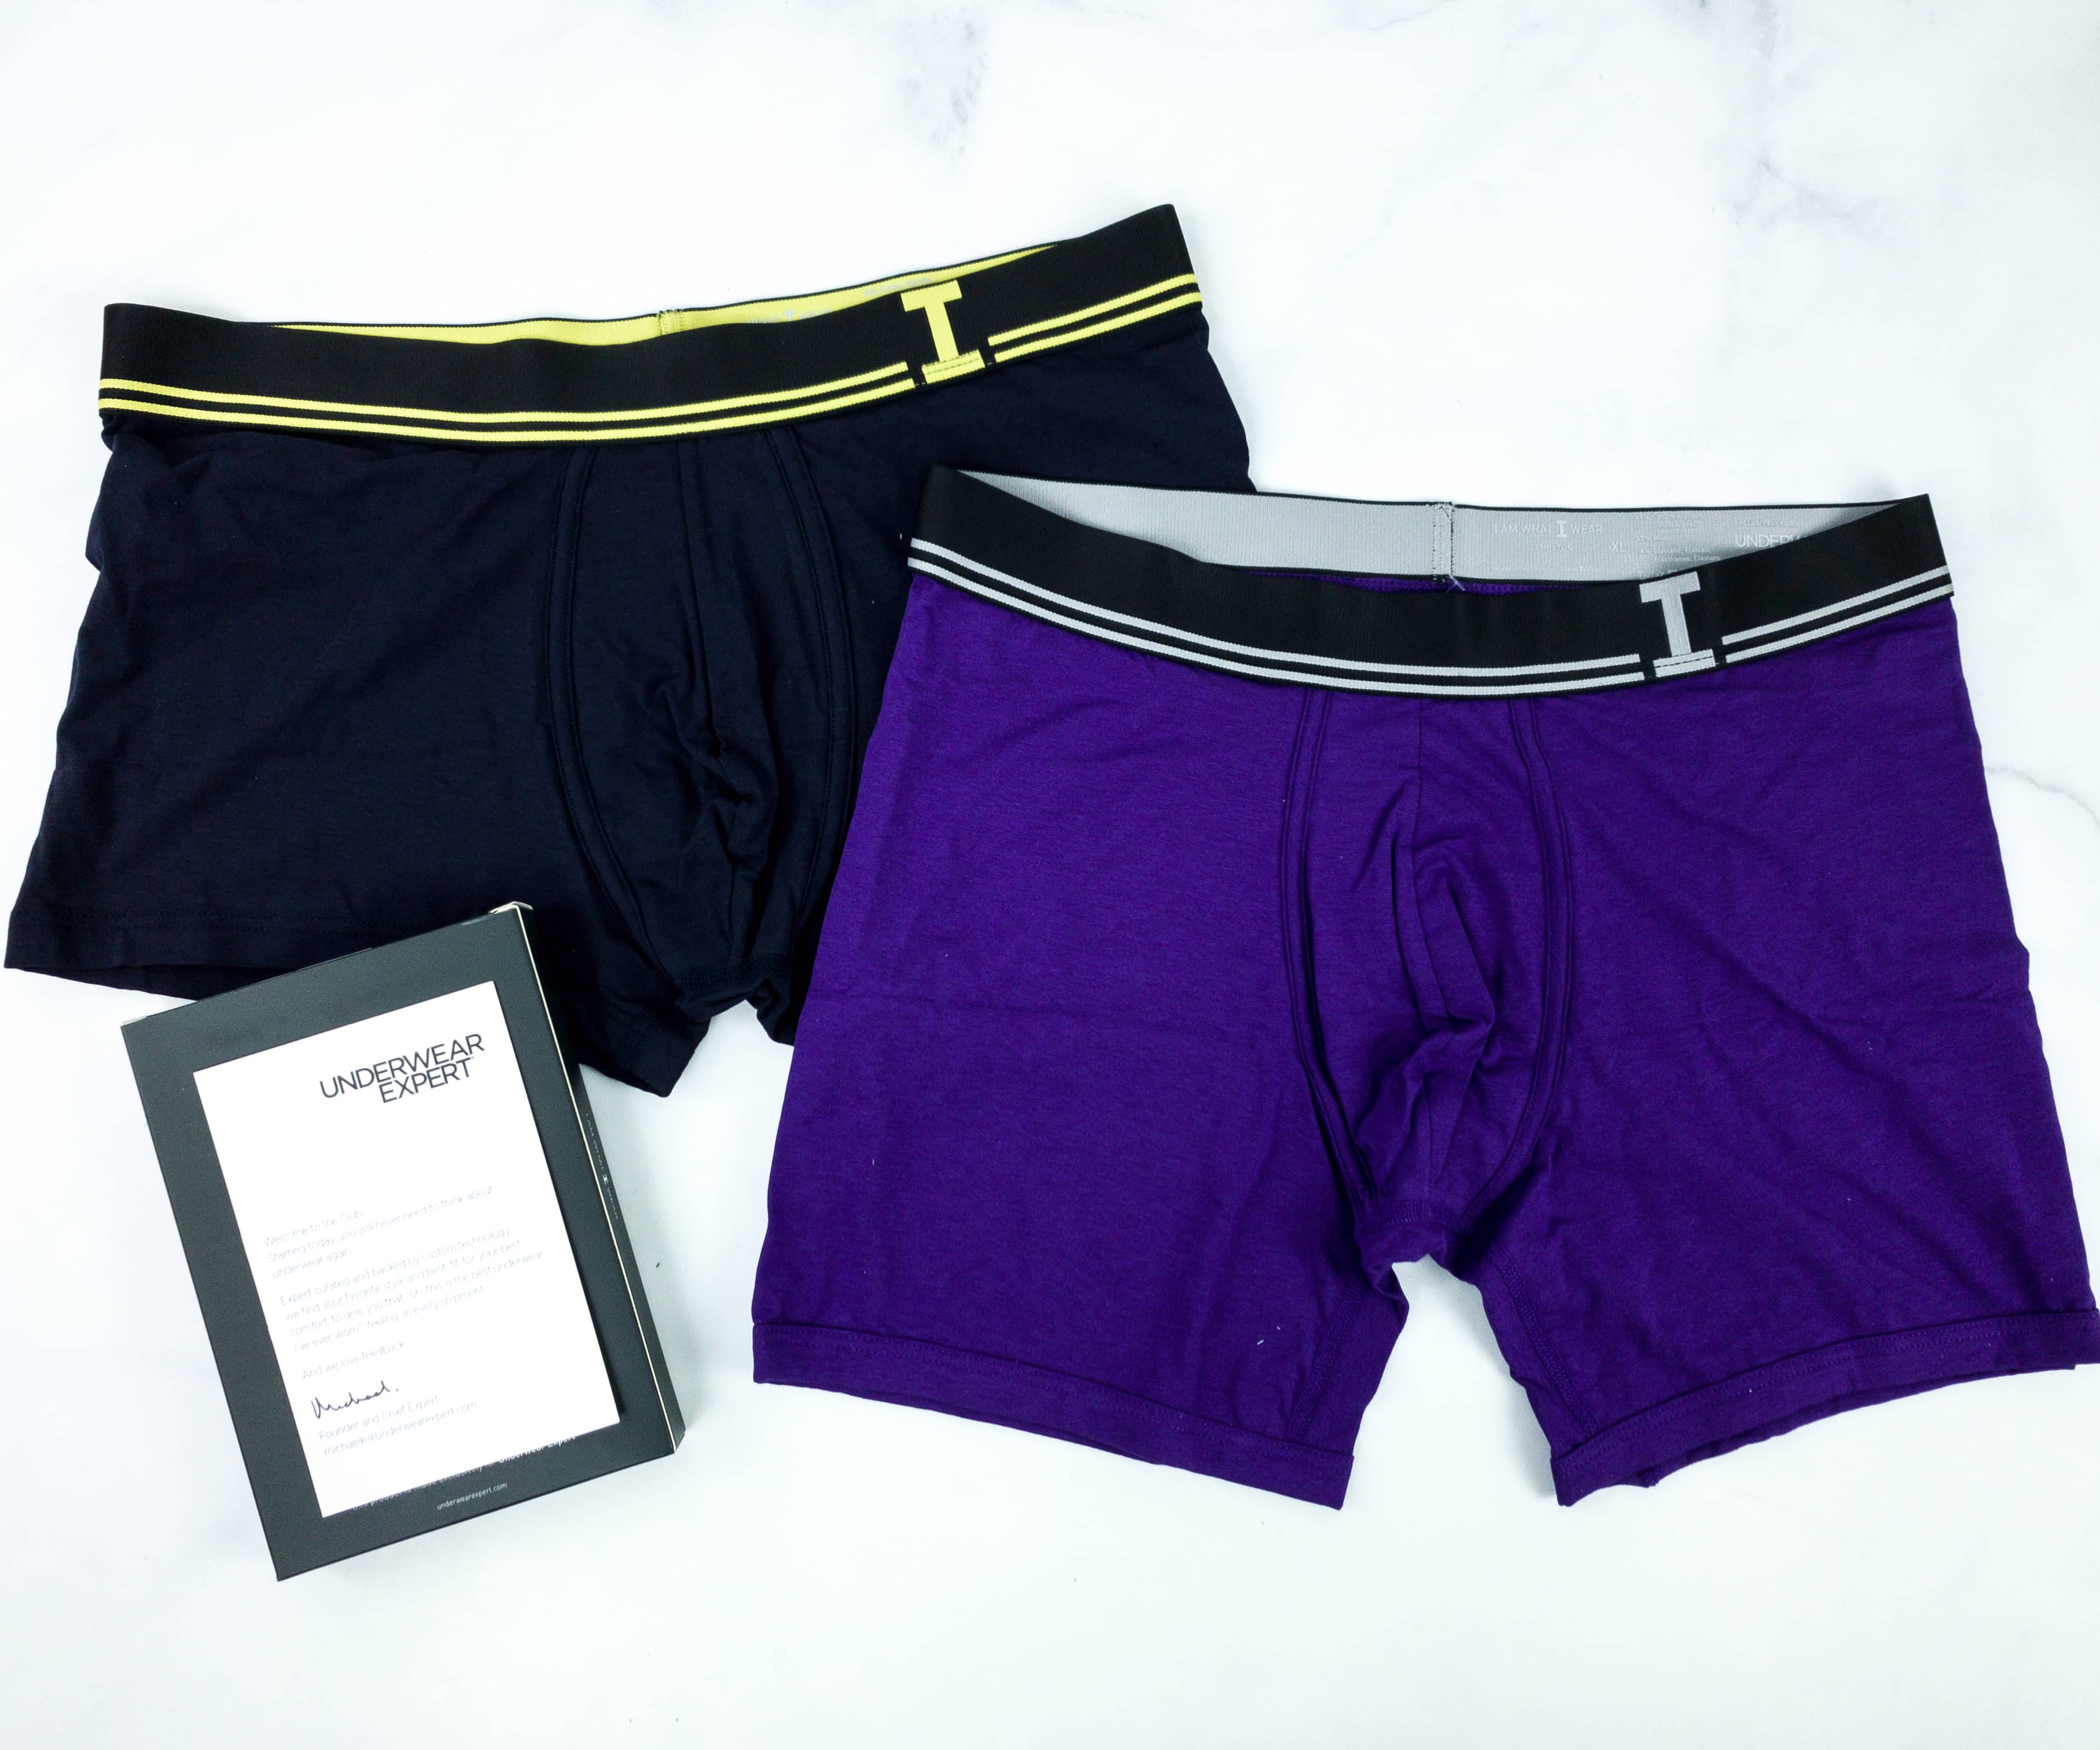 Underwear Expert January 2020 Subscription Box Review + Coupon - Hello  Subscription